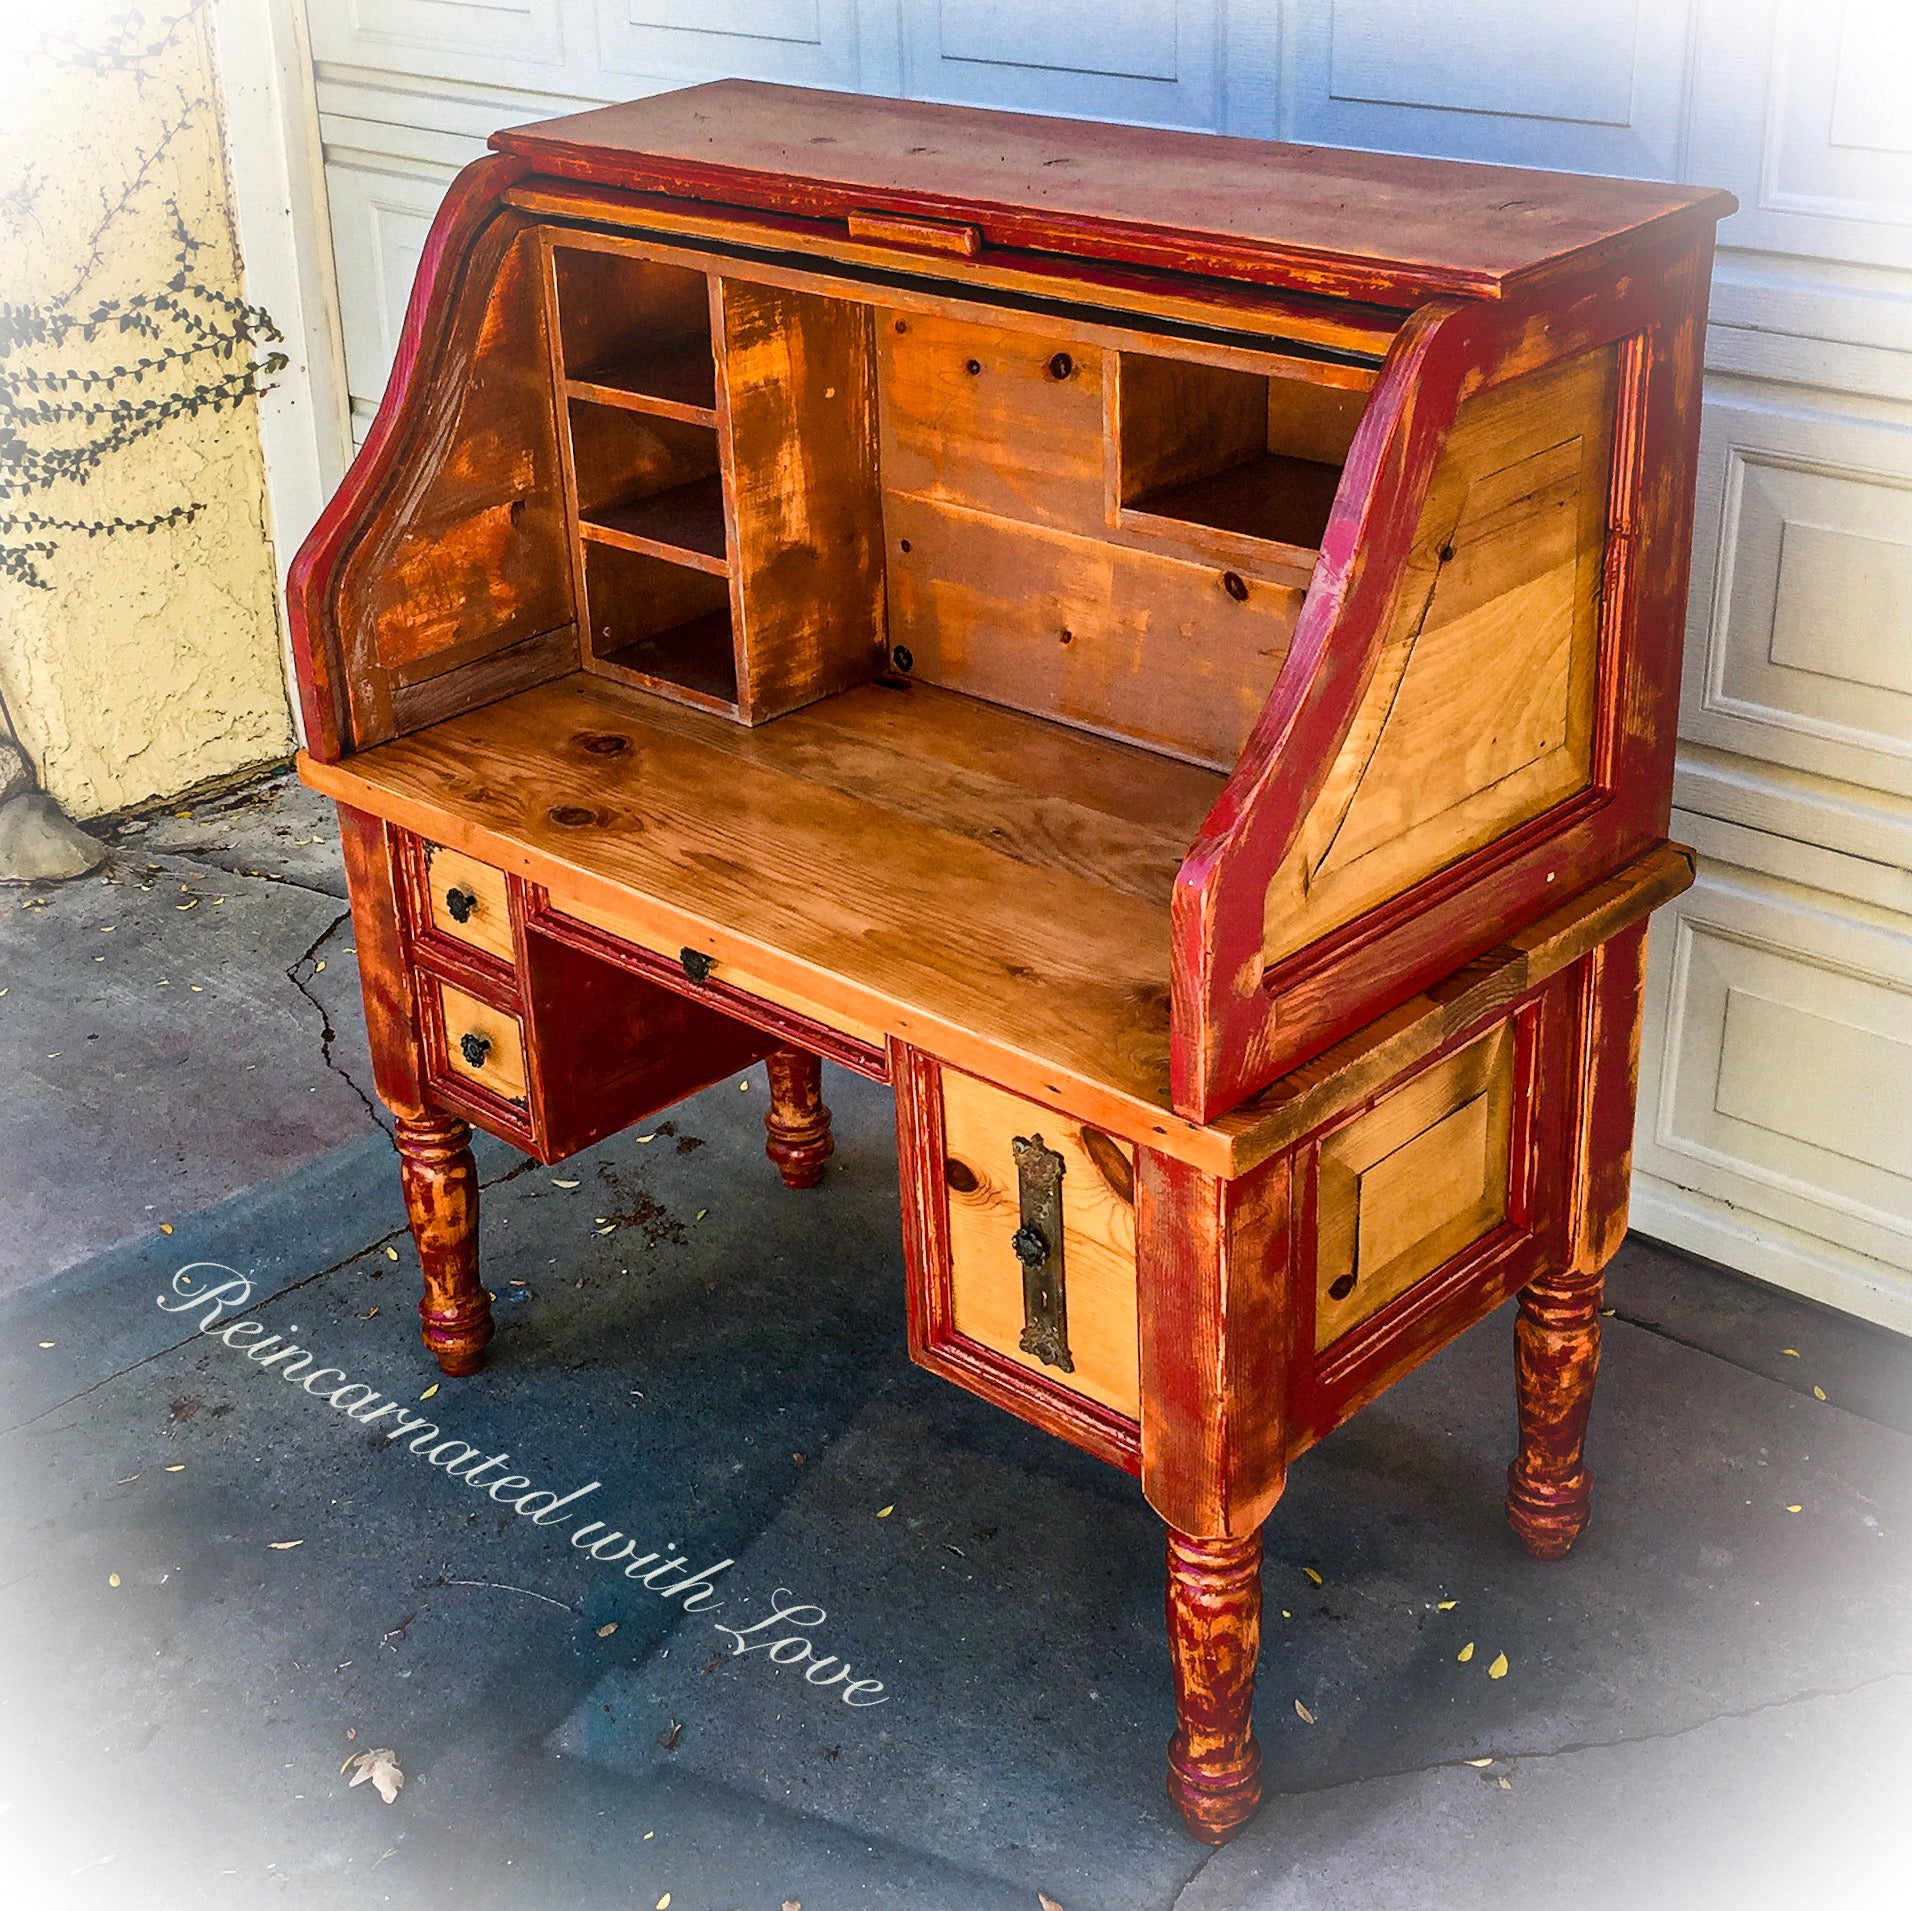 Reclaimed wood, roll top desk, painted with distressed, red trim & stained, solid pine, panels, drawer faces & desktop.